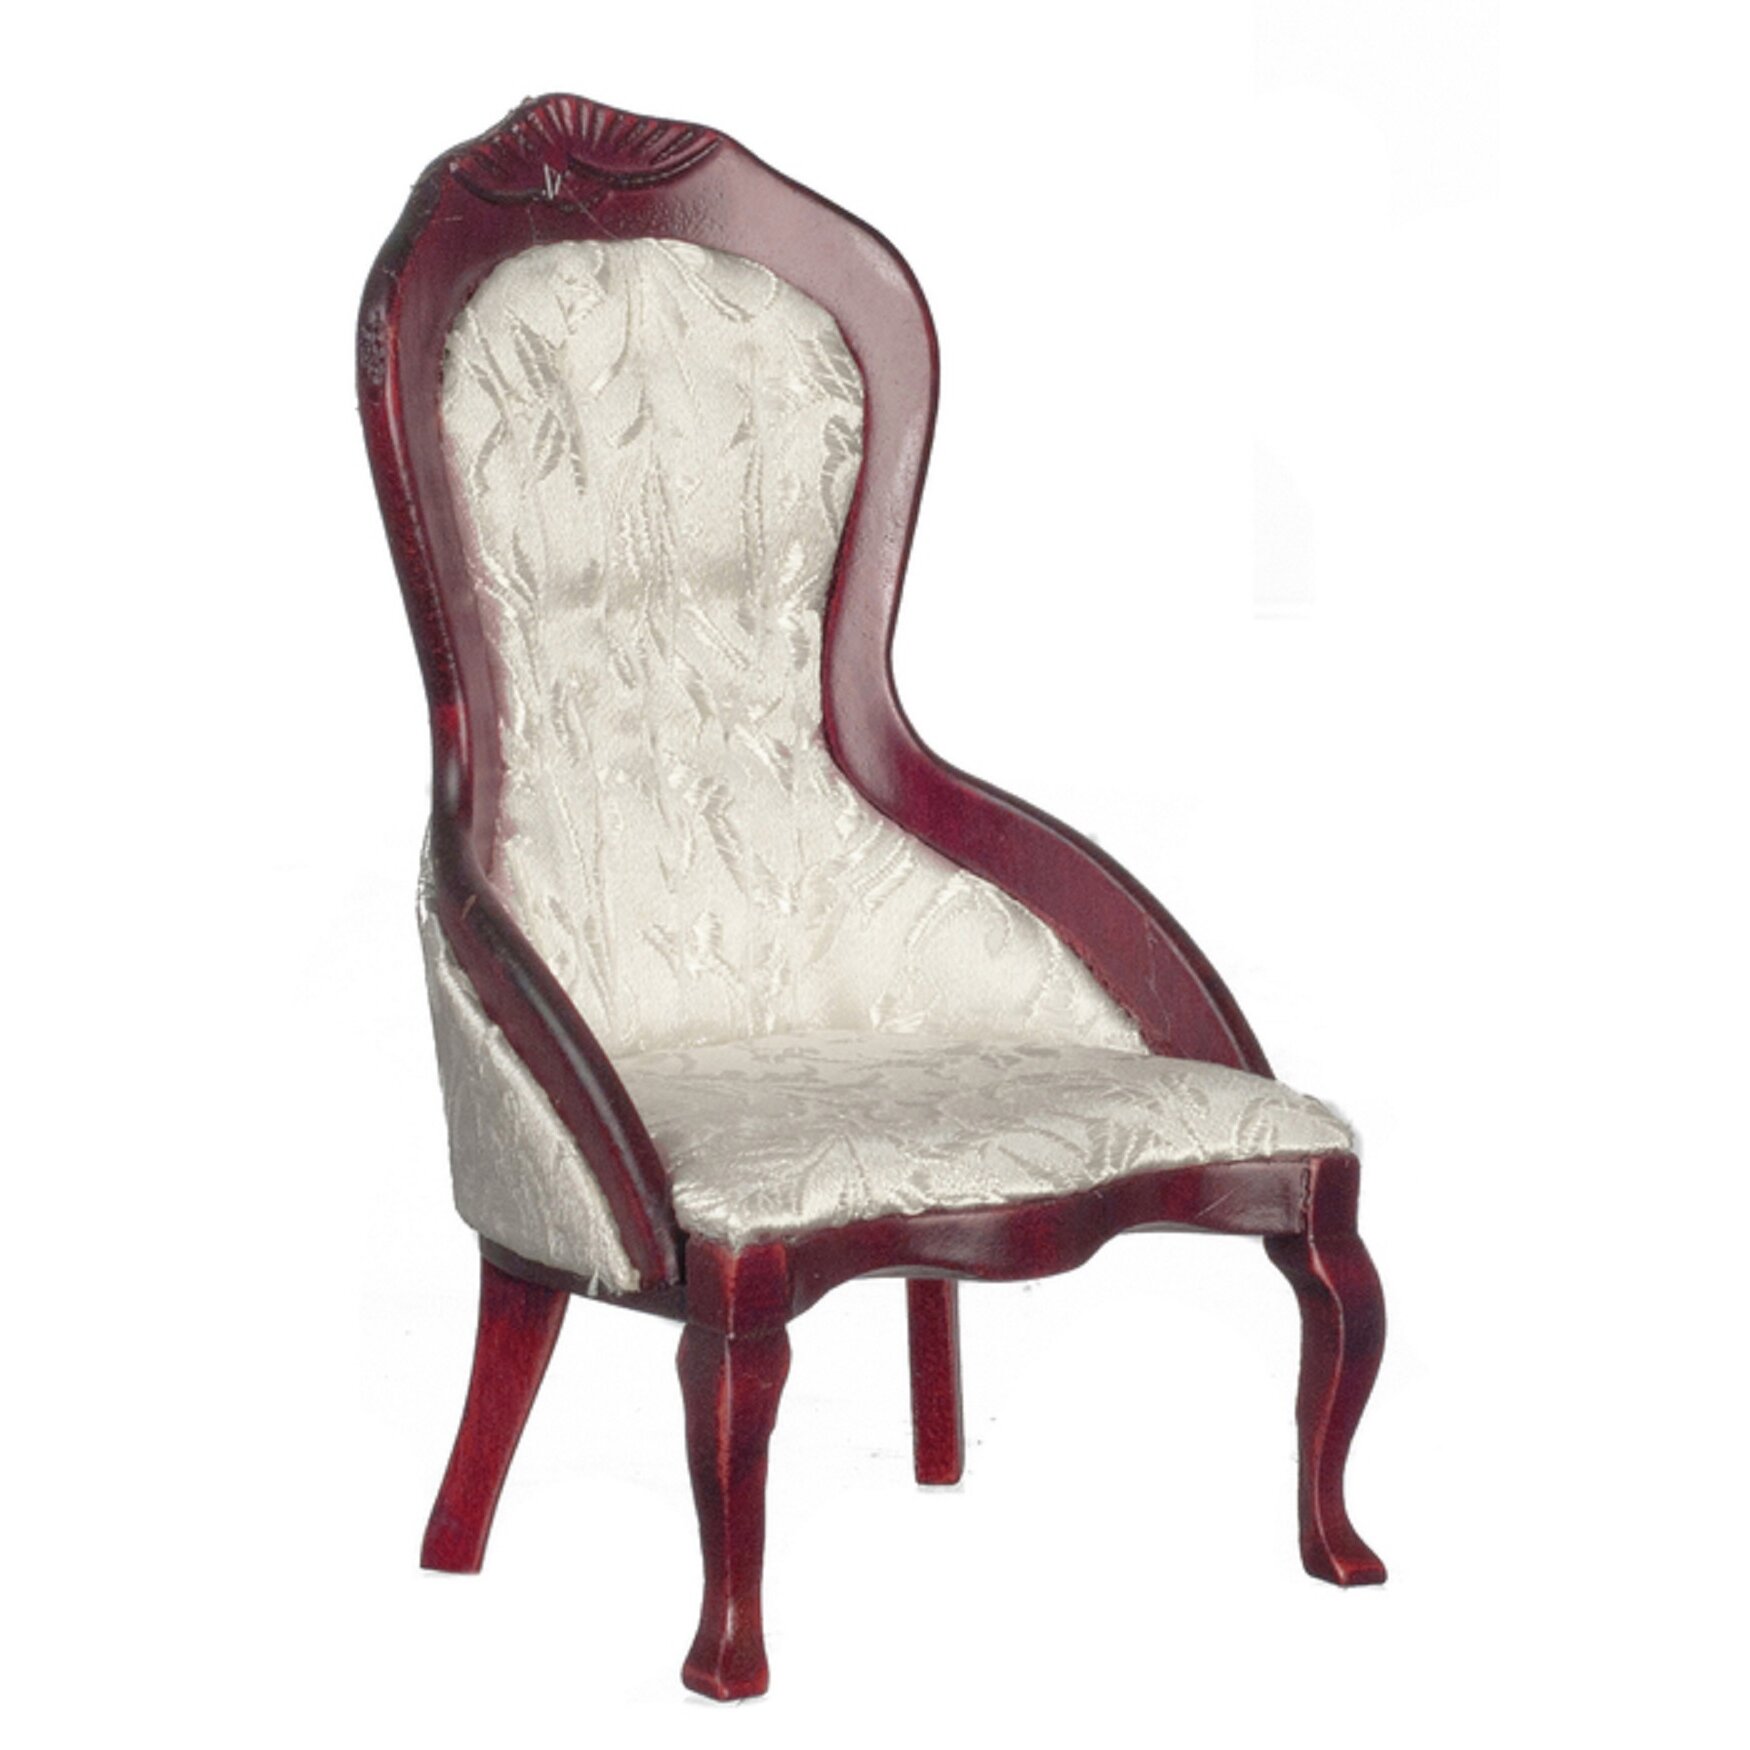 Dolls House Victorian Mahogany White Ladies Chair Armchair Living Room Furniture